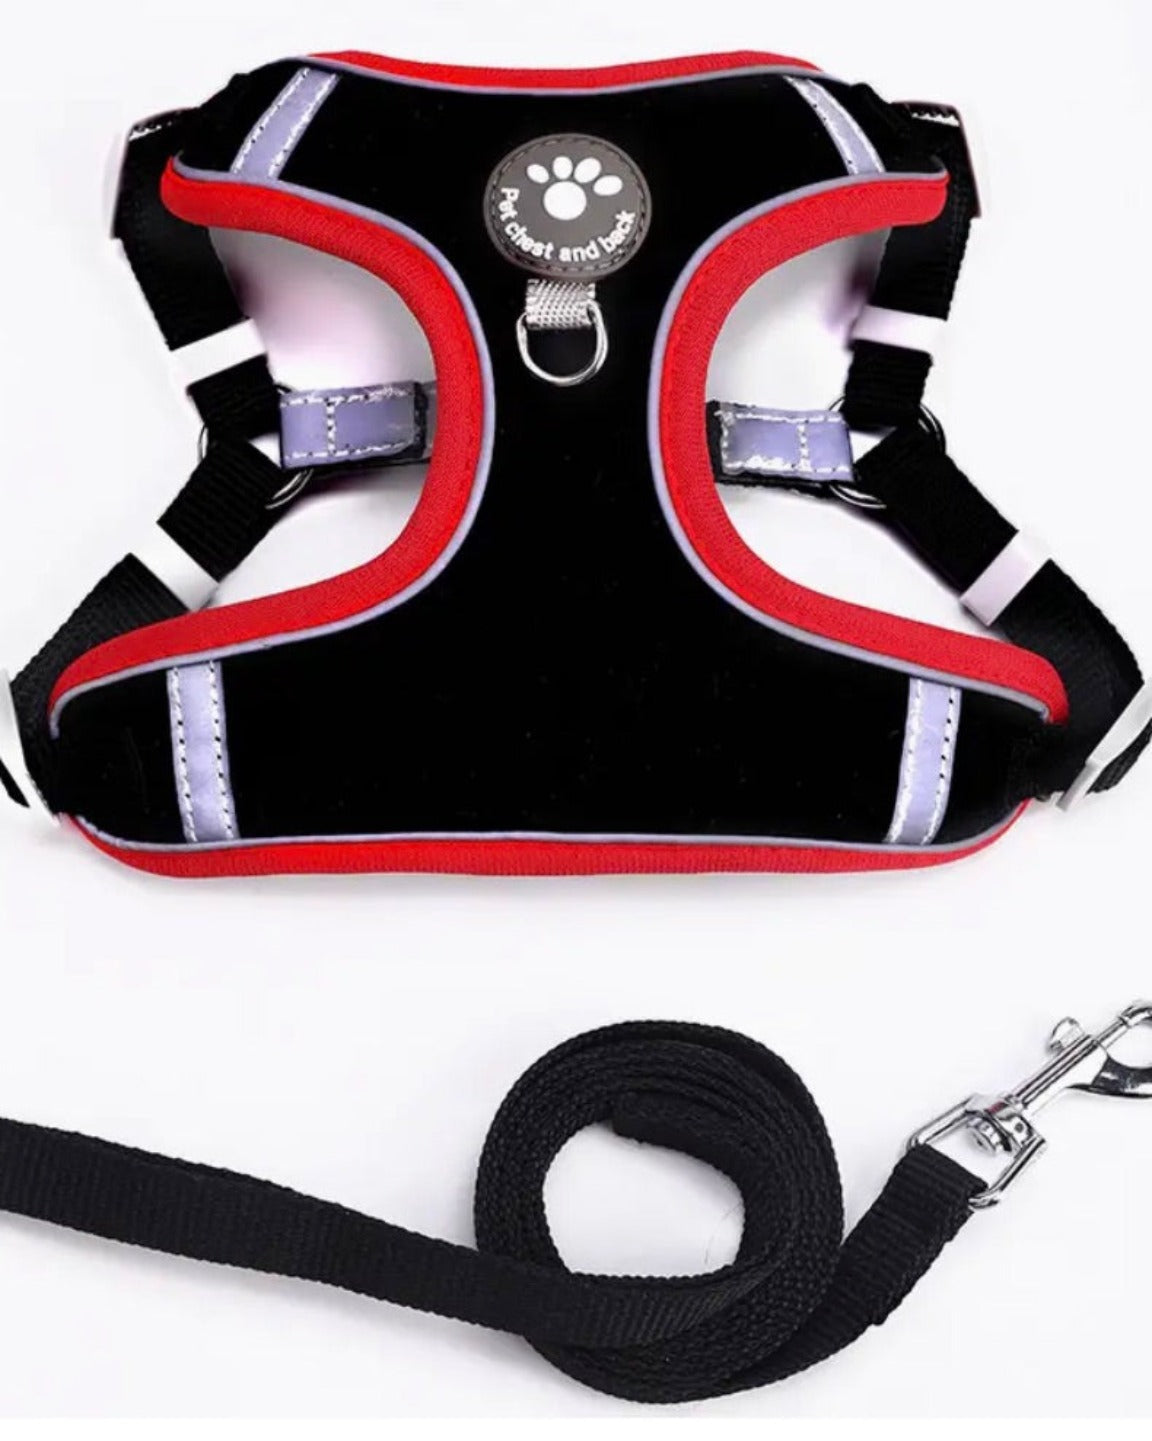 The adjustable sports harness